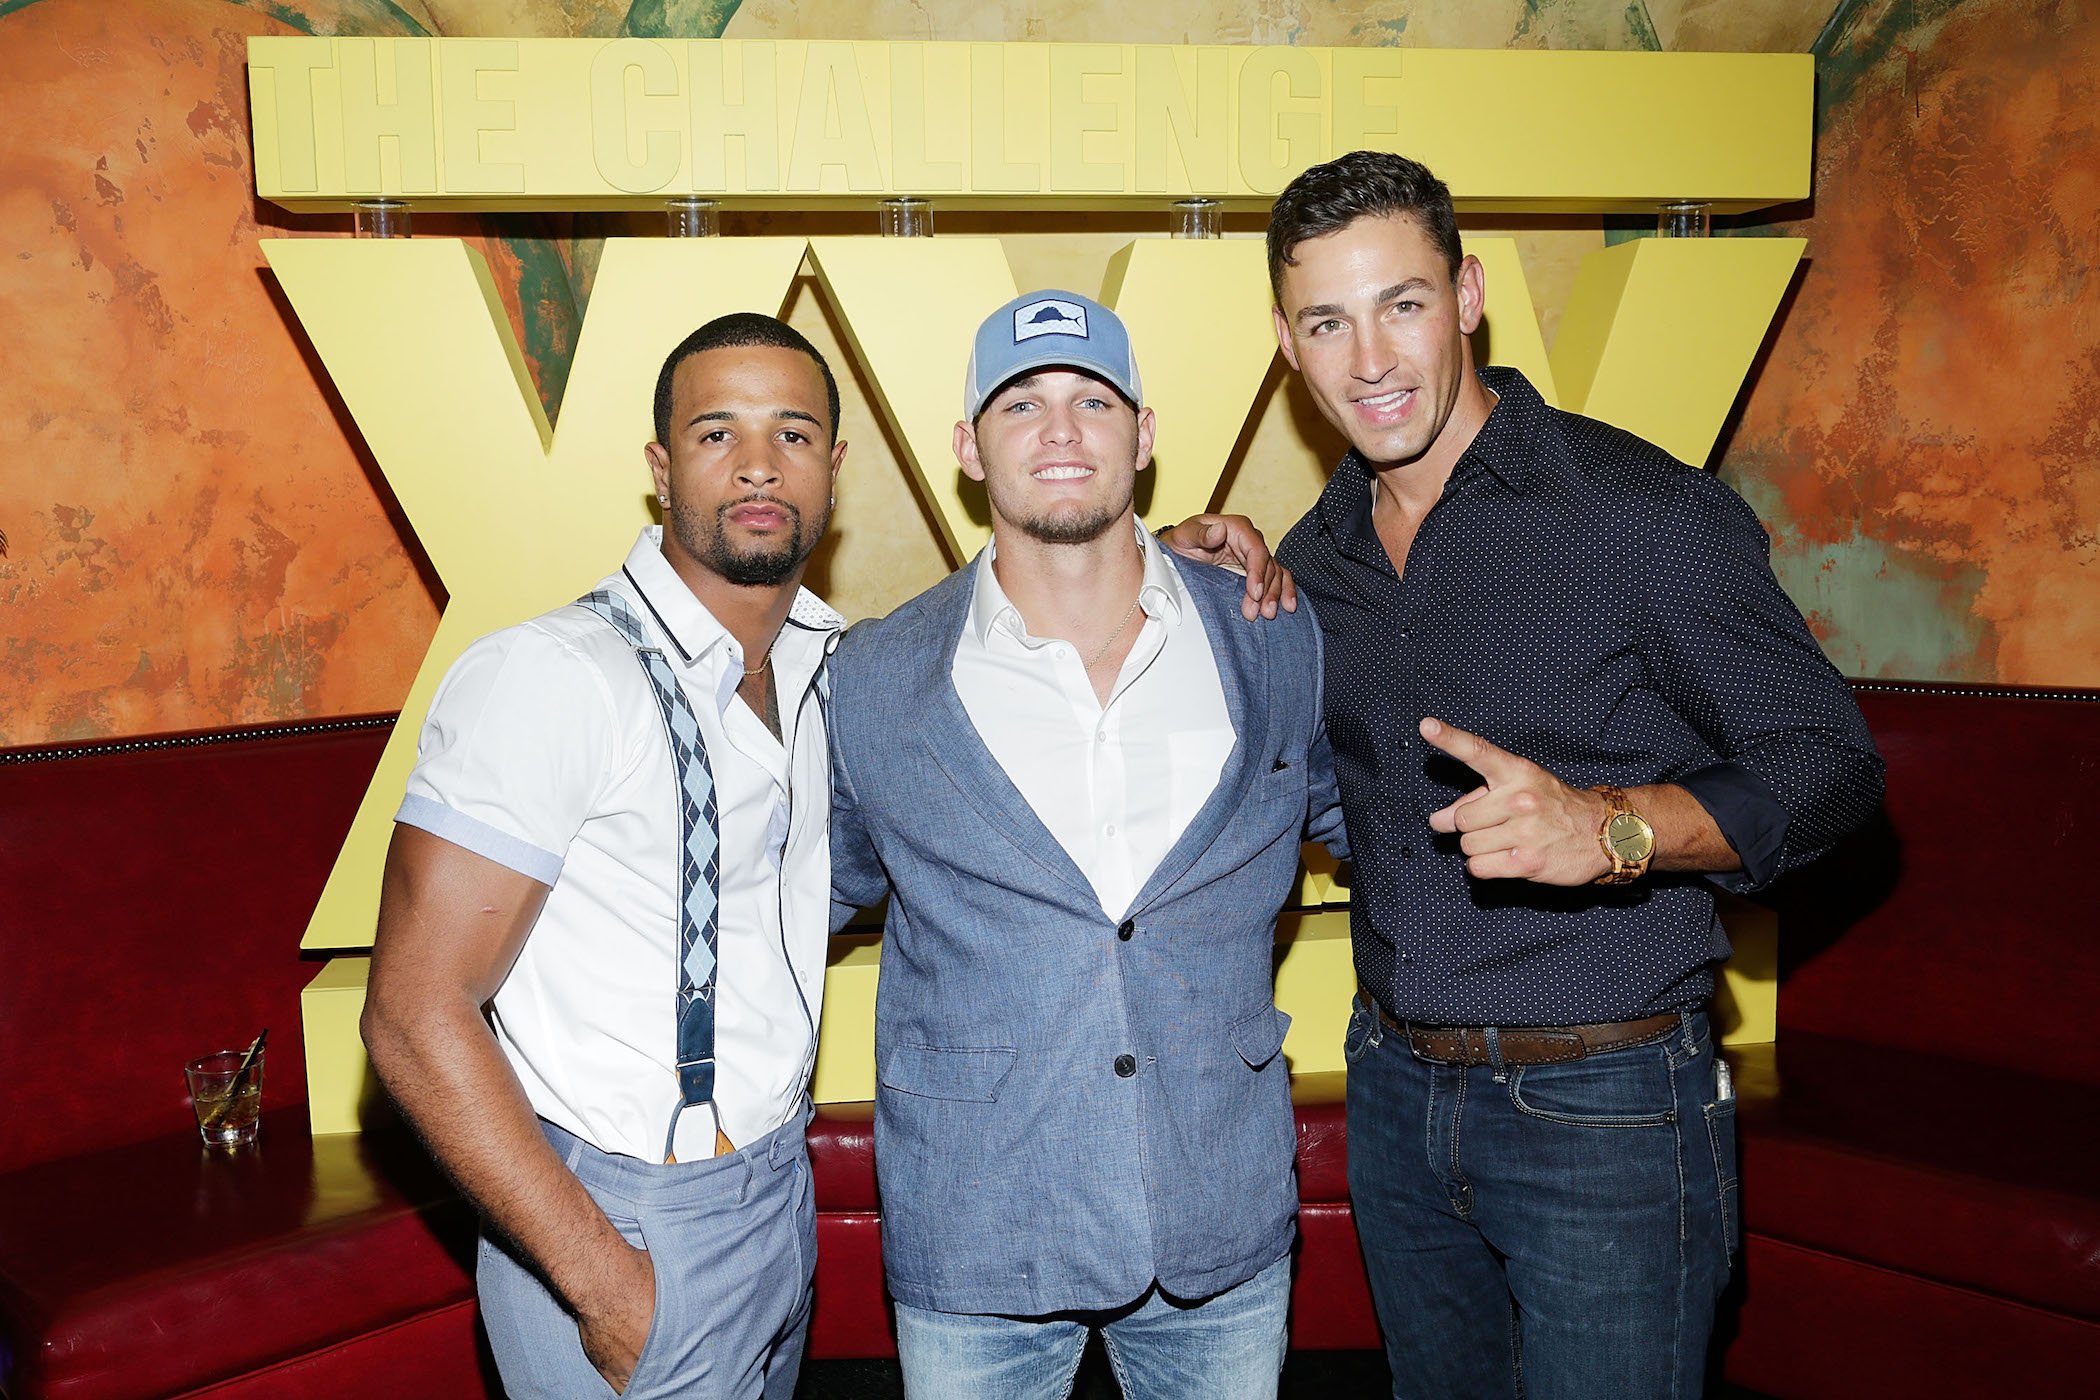 Nelson Thomas, Hunter Barfield, and Tony Raines standing together at MTV's 'The Challenge XXX': Ultimate Fan Experience